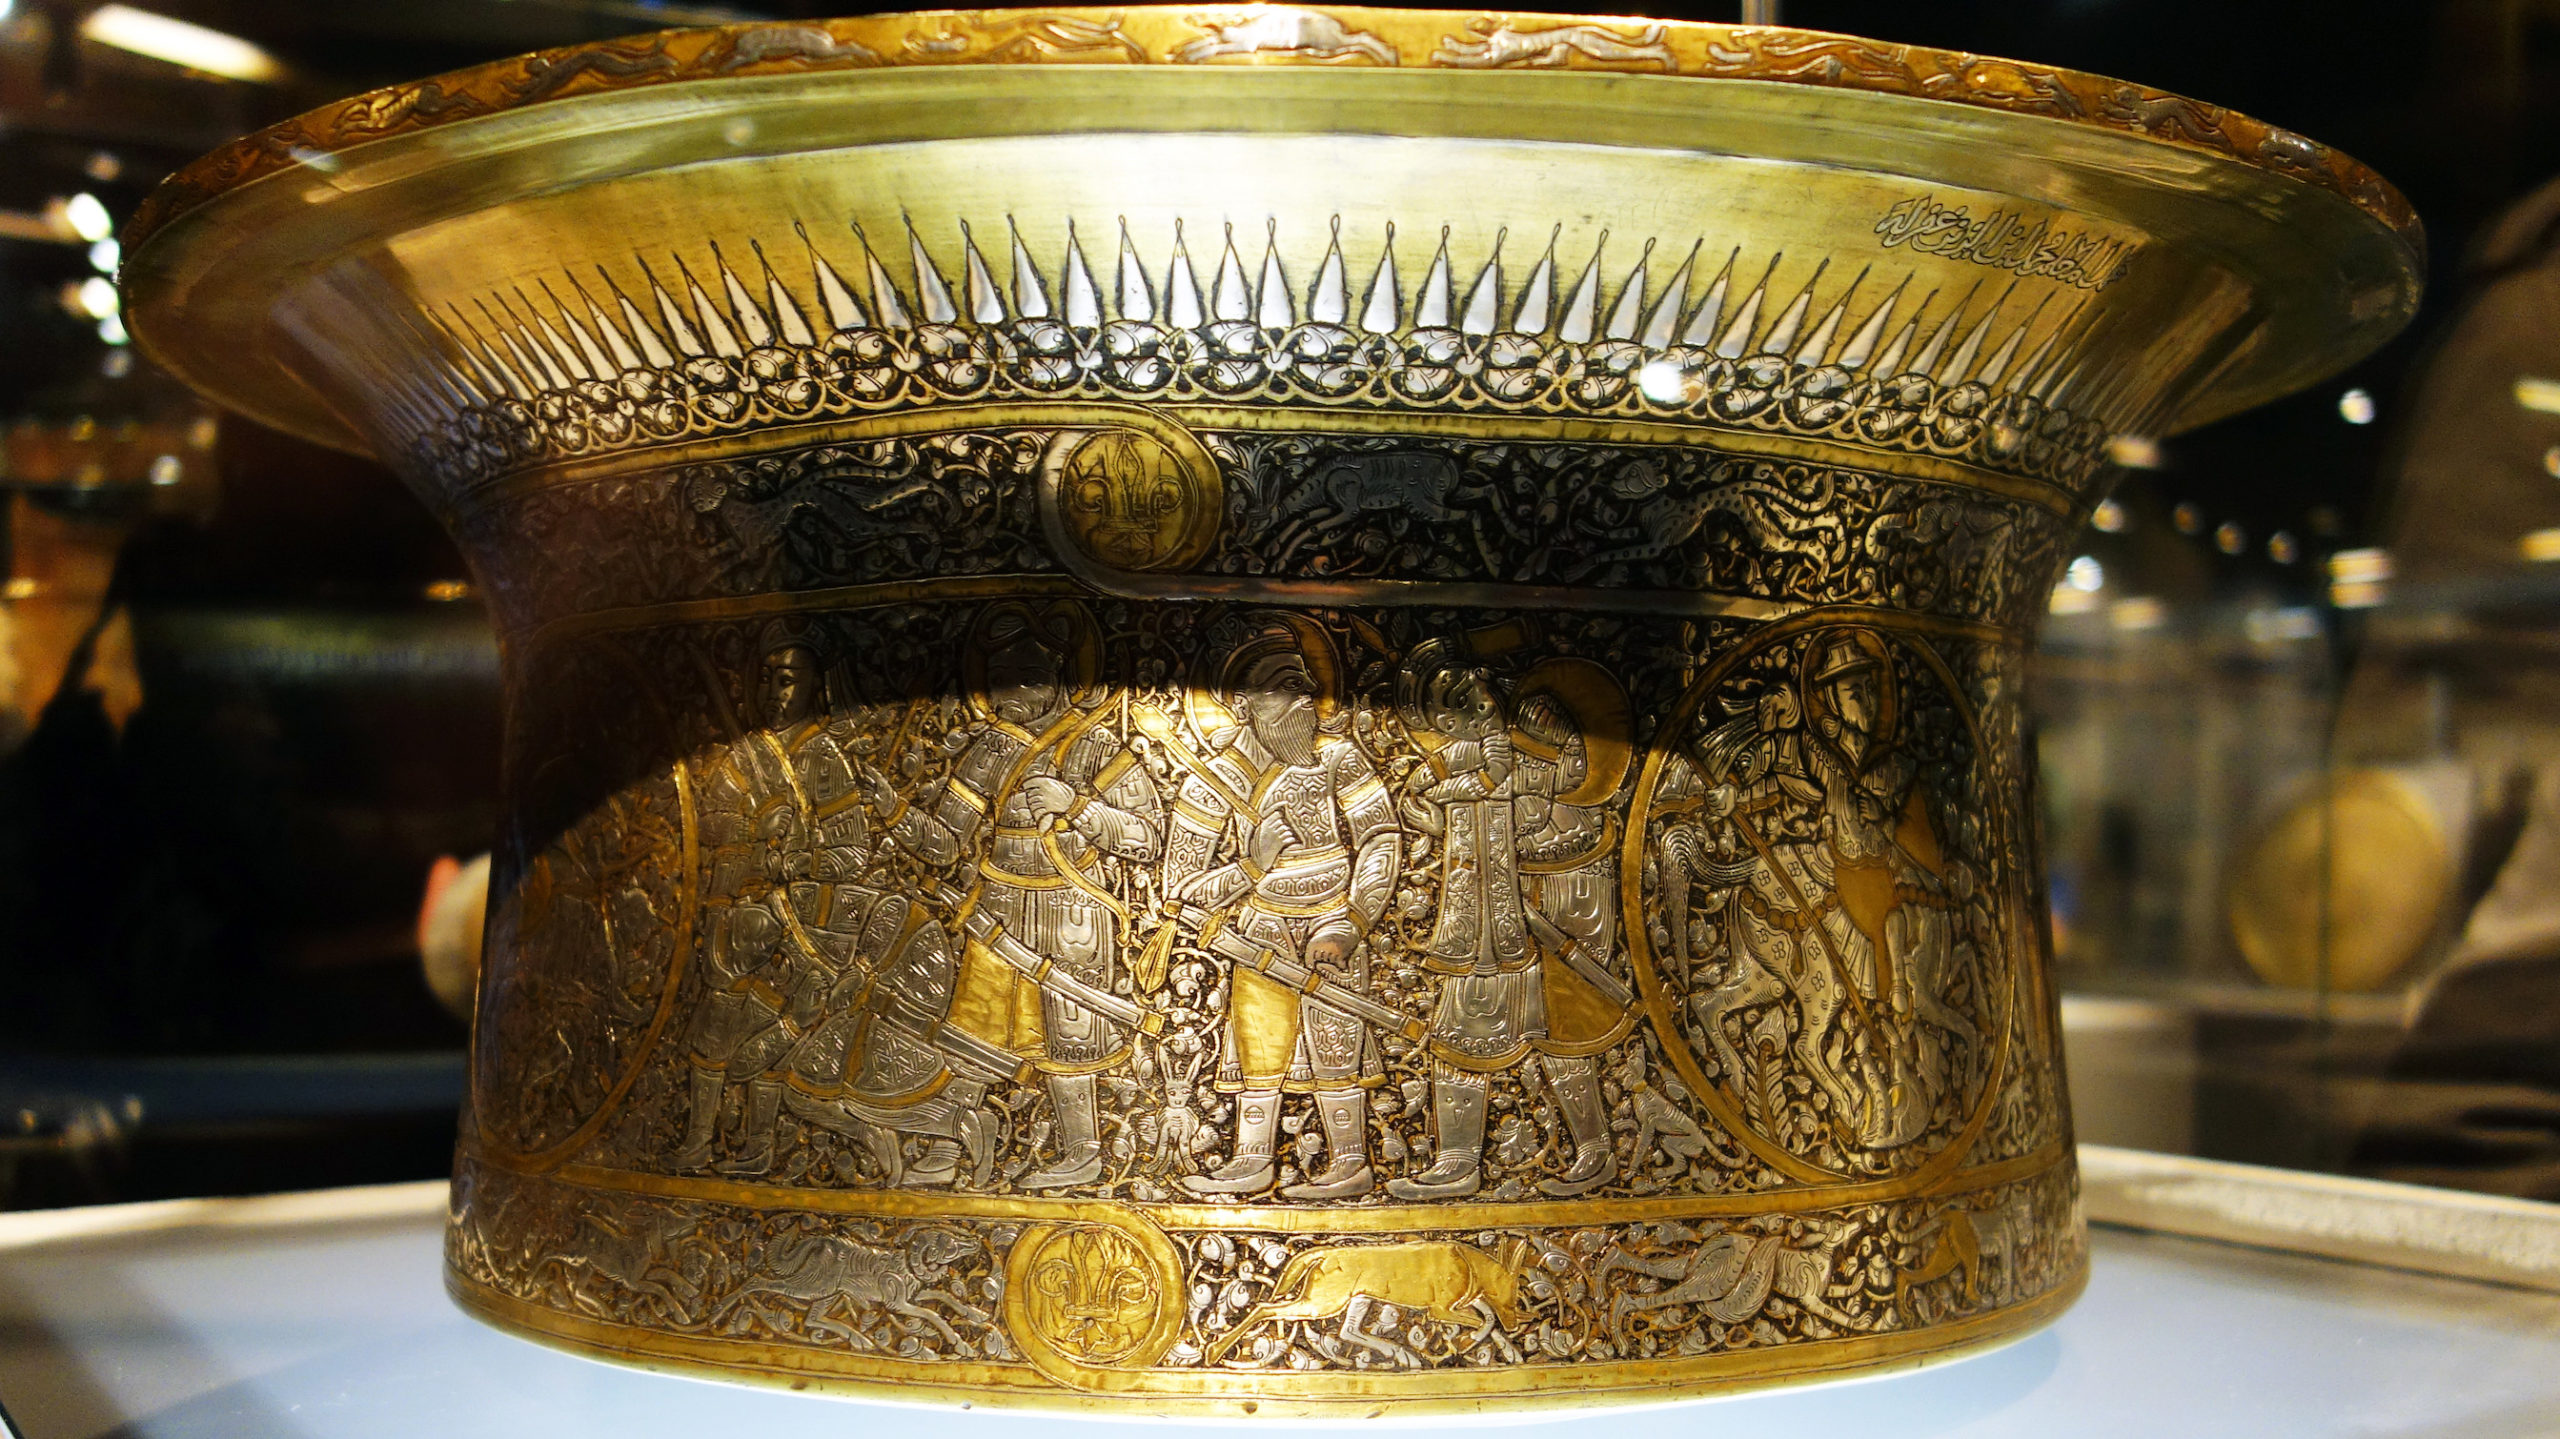 Mohammed ibn al-Zain, Basin (Baptistère de Saint Louis), c. 1320-40, brass inlaid with silver and gold, 22.2 x 50.2 cm, Egypt or Syria (Musée du Louvre)